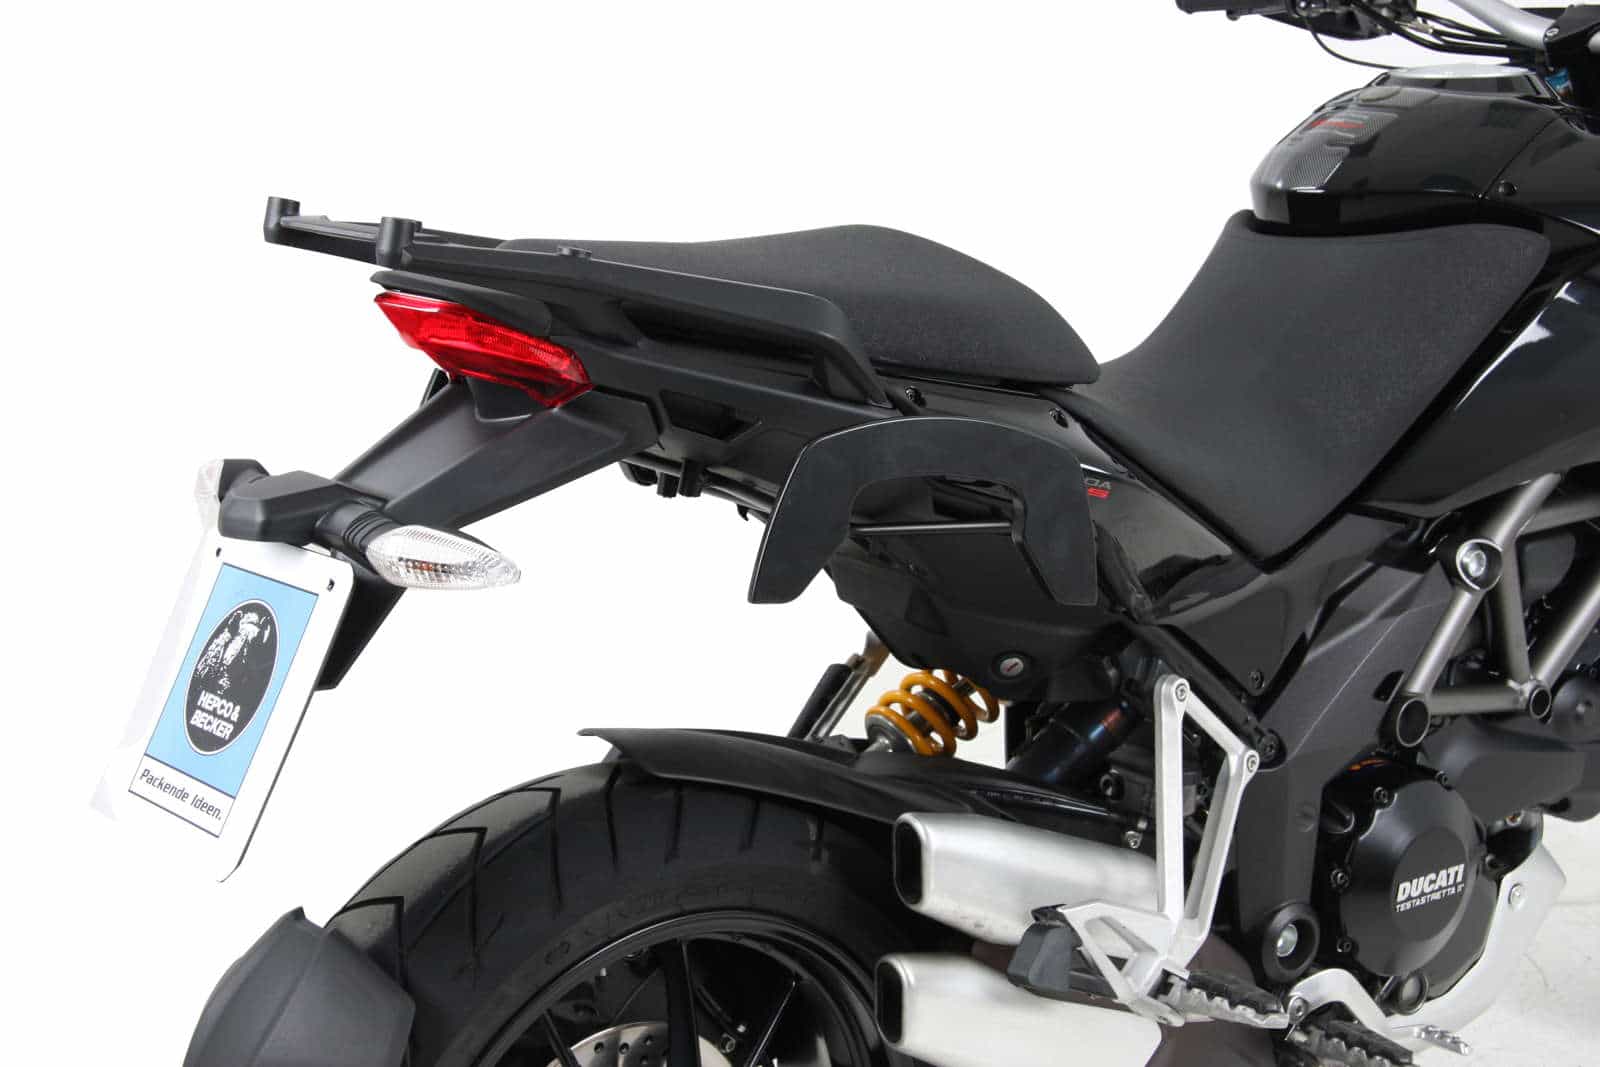 C-Bow sidecarrier for Ducati Multistrada 1200/S (2010-2014)